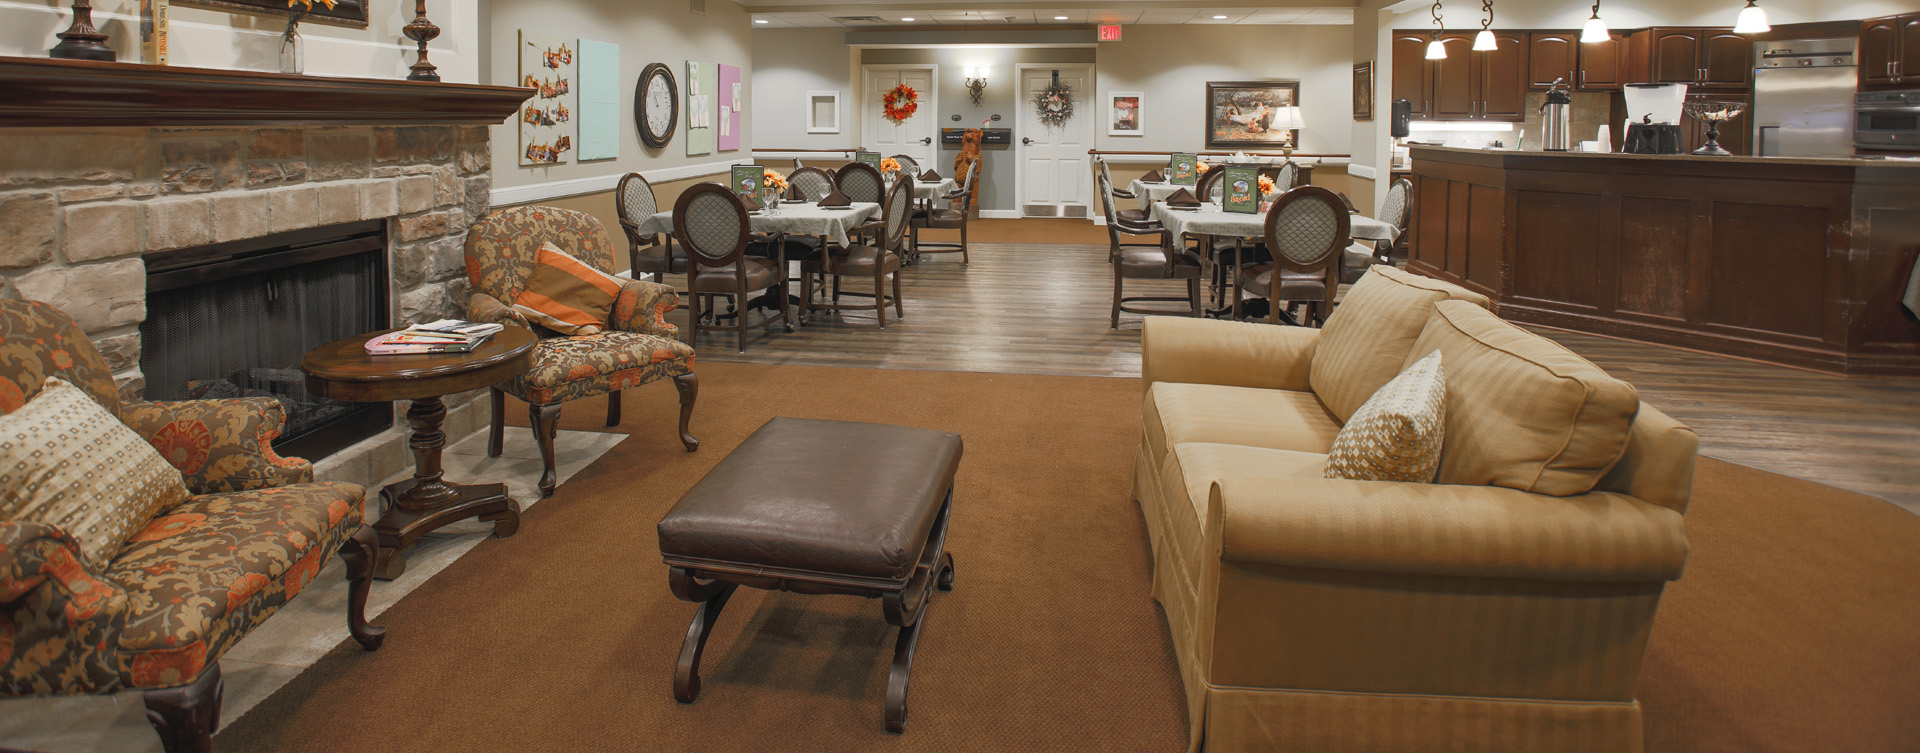 Residents can enjoy furniture covered in cozy fabrics in the Mary B’s living room at Bickford of Carmel